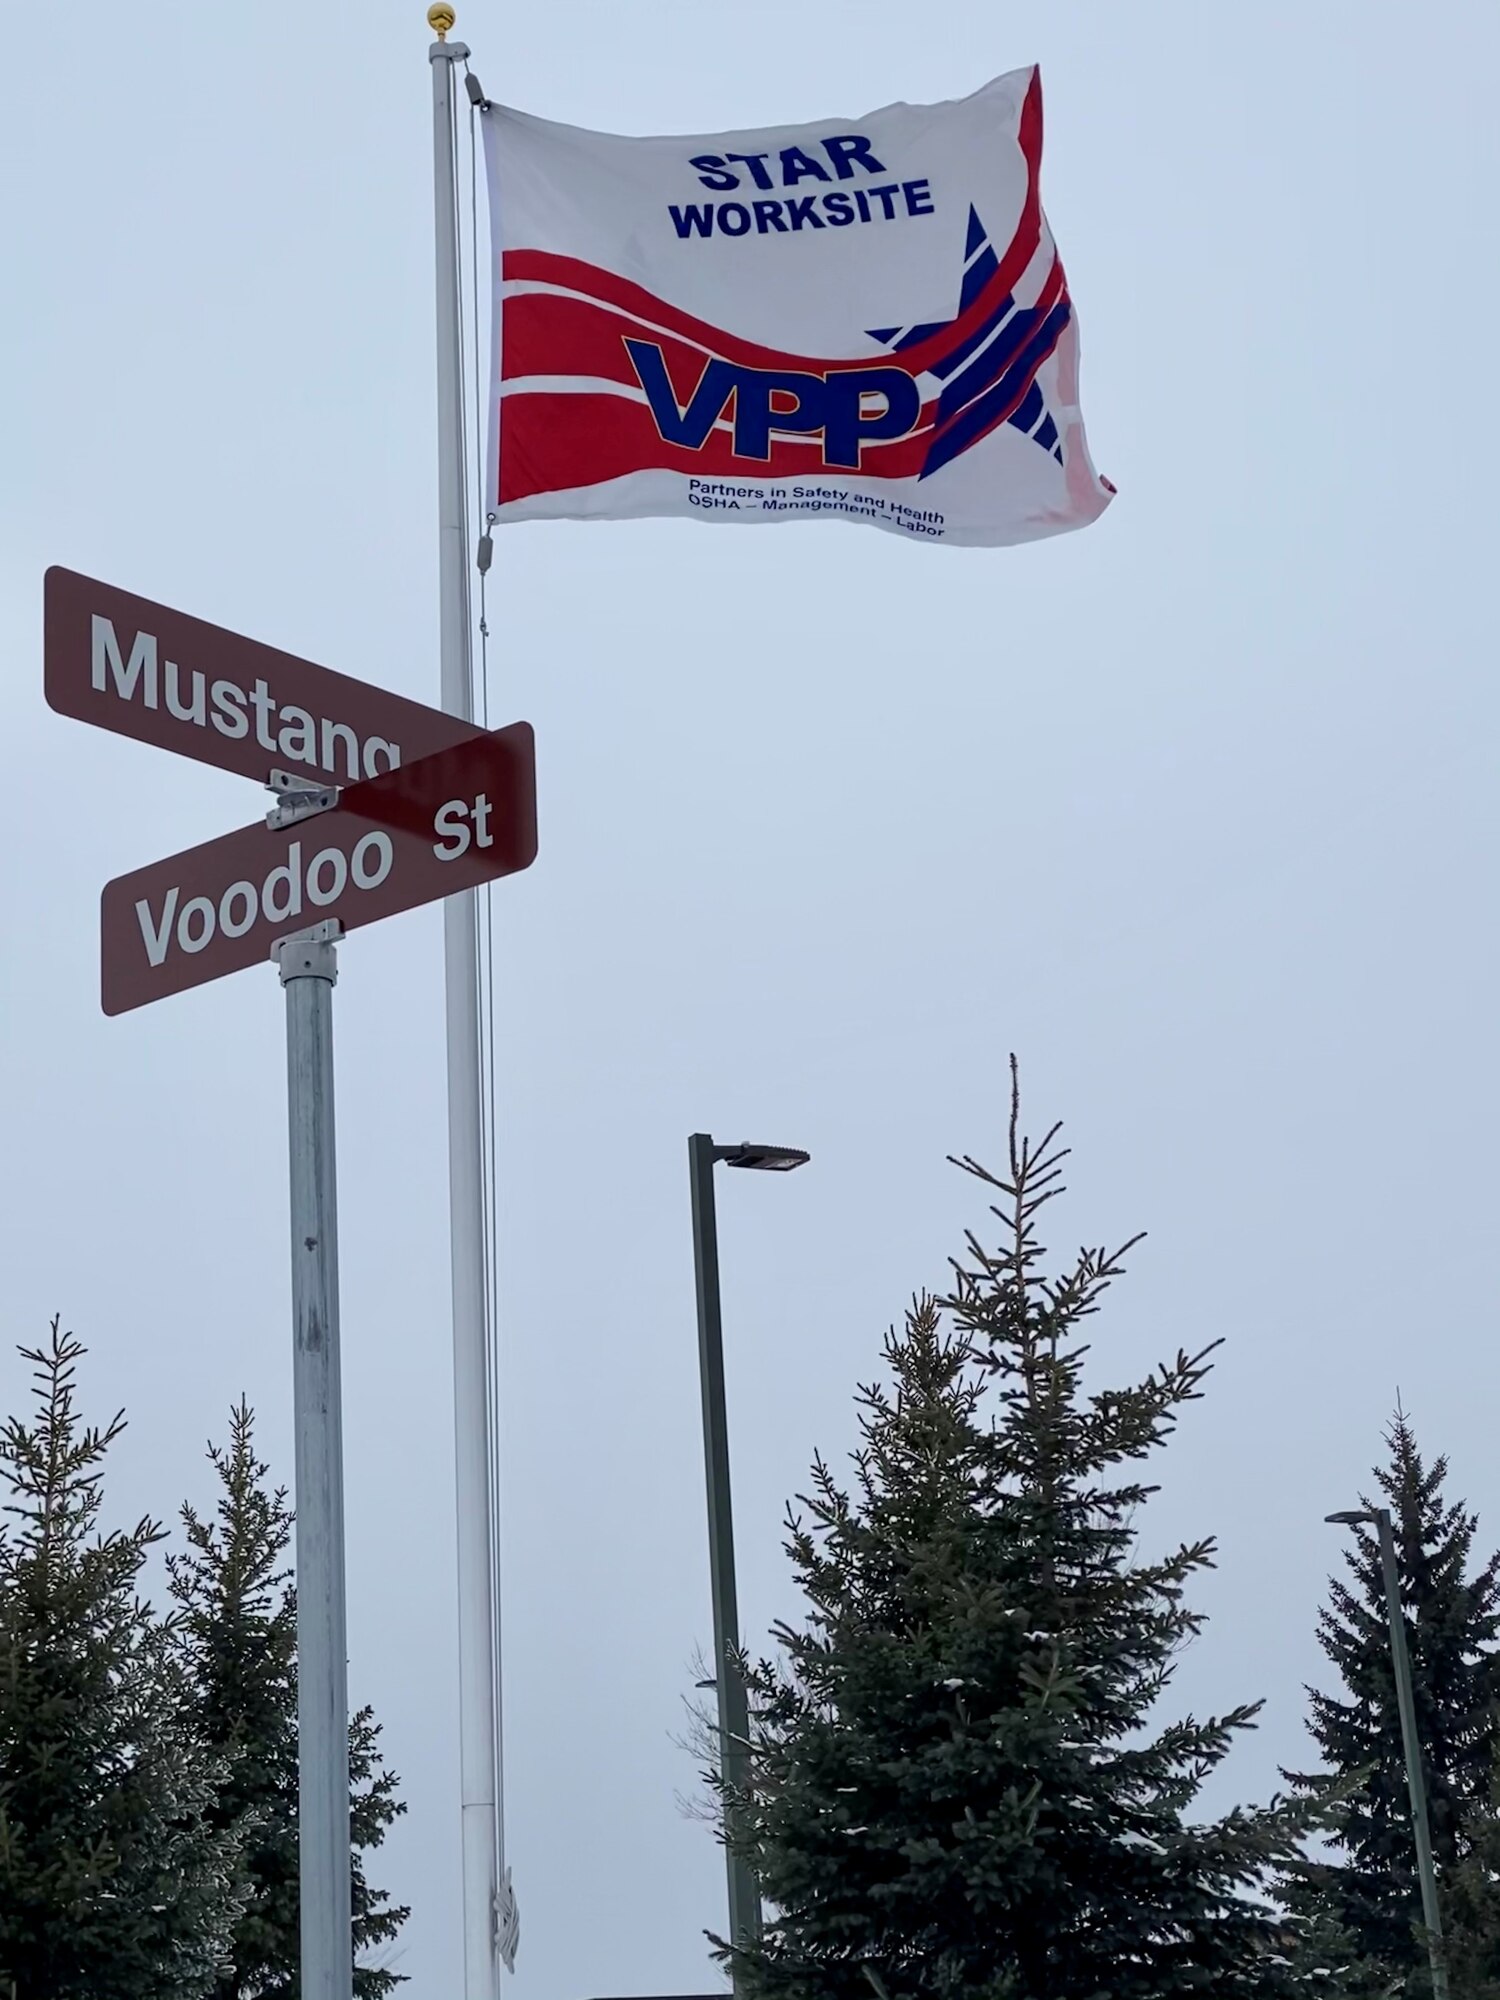 On the corner of Mustang Drive and Voodoo Street at the 148th Fighter Wing, the Voluntary Protection Program (VPP) flag flies proudly to display the wing’s STAR rating since 2008.